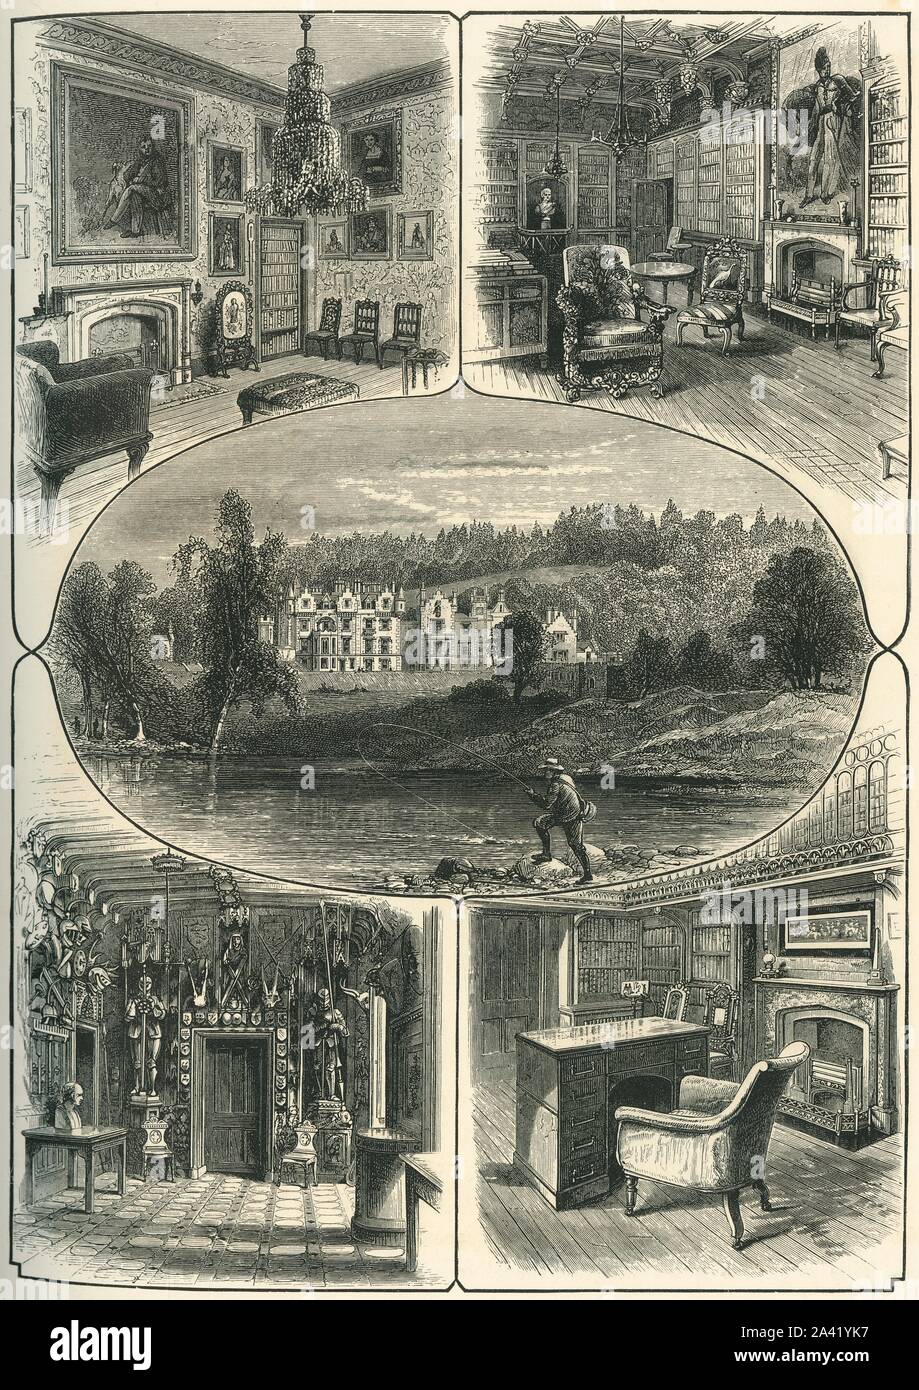 'Abbotsford', c1870. Historic country house in the Scottish Borders on the River Tweed and former residence of novelist and poet, Sir Walter Scott.The house was opened to the public in 1833 and continued to be occupied by Scott's descendants until 2004. From &quot;Picturesque Europe - The British Isles, Vol. I&quot;. [Cassell, Petter &amp; Galpin, London, c1870] Stock Photo